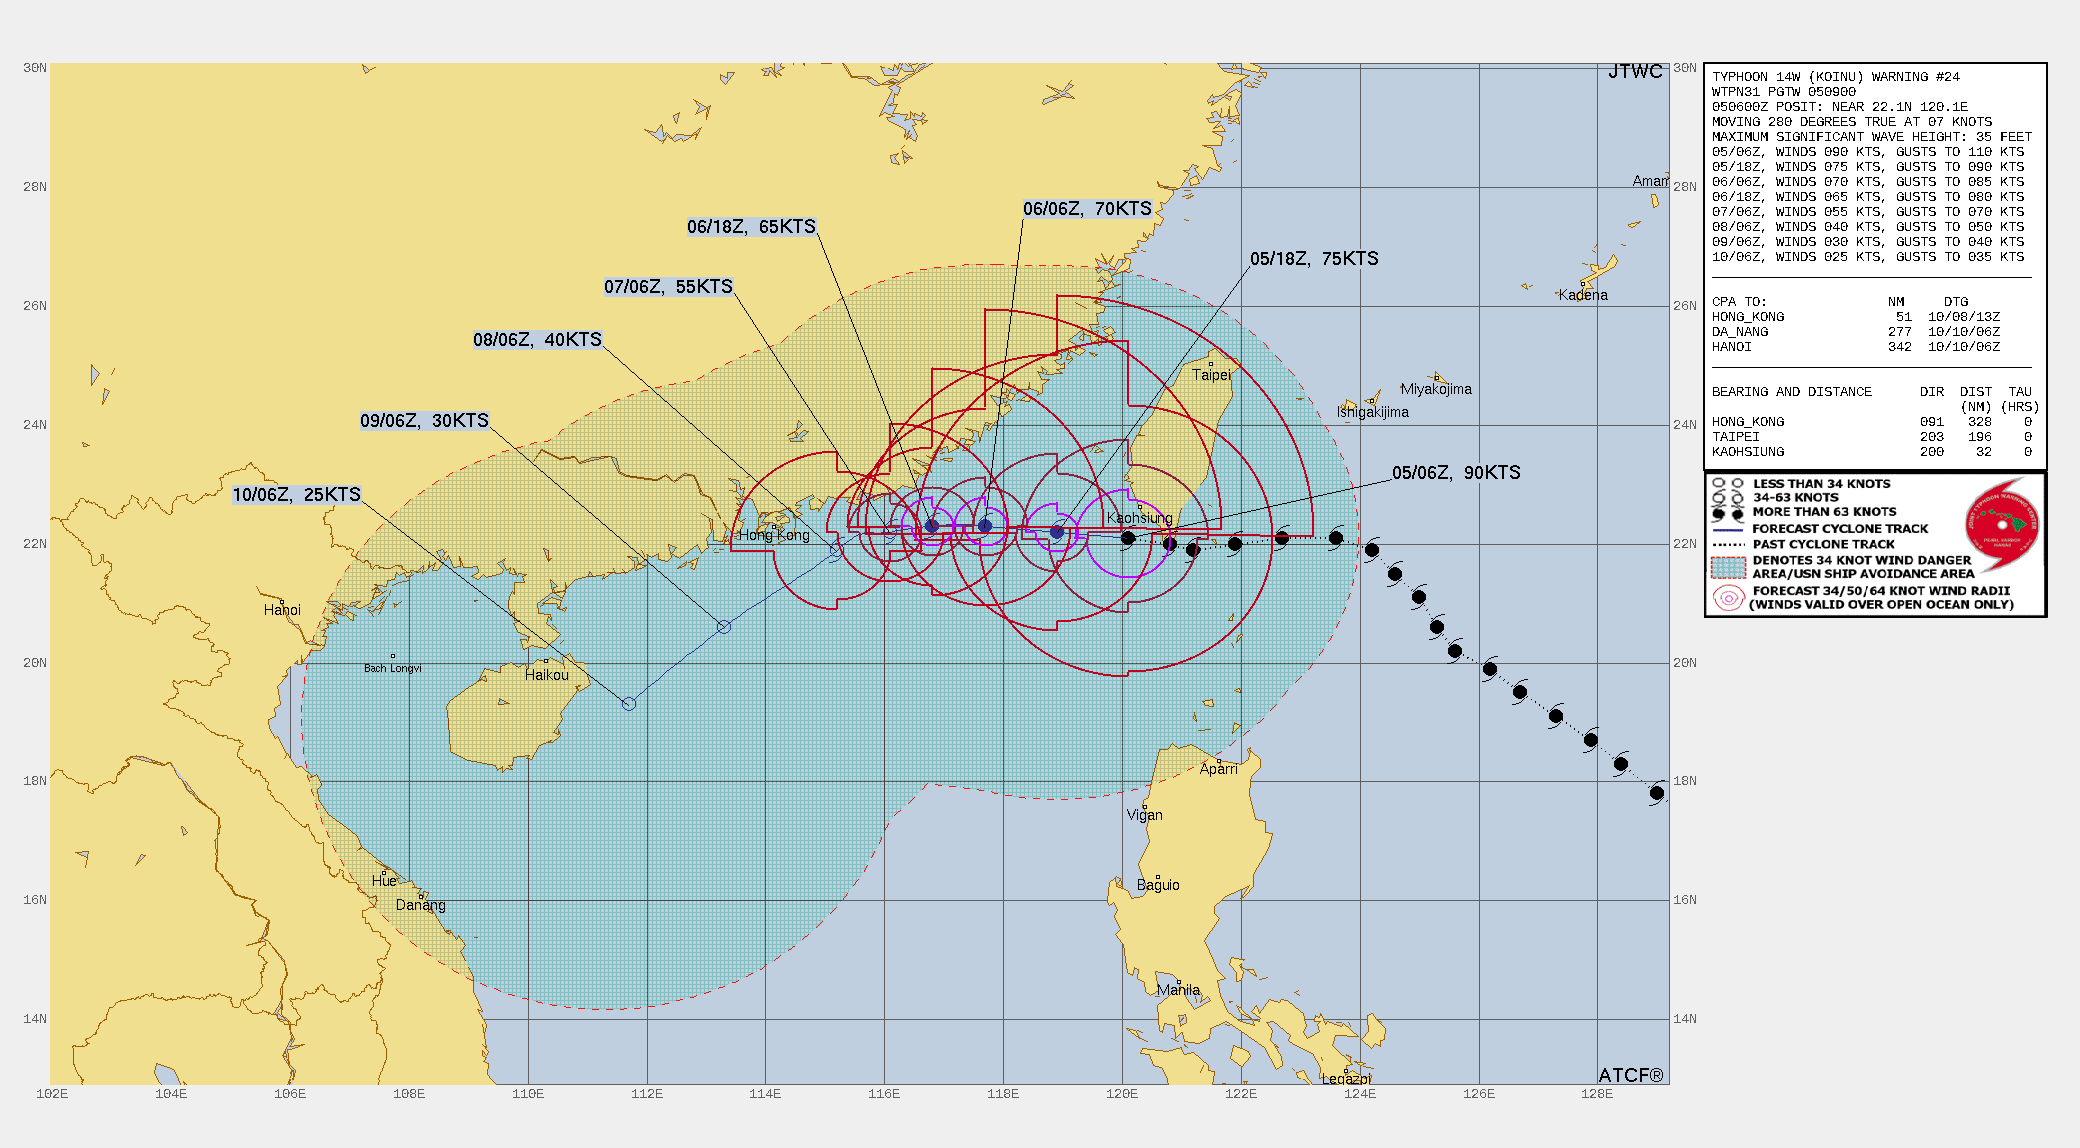 FORECAST REASONING.  SIGNIFICANT FORECAST CHANGES: THERE ARE NO SIGNIFICANT CHANGES TO THE FORECAST FROM THE PREVIOUS WARNING.  FORECAST DISCUSSION: TYPHOON 14W IS FORECAST TO CONTINUE ON A WESTWARD TRACK THROUGH TAU 48, THE SYSTEM WILL SLOW DOWN AS IT APPROACHES THE COAST OF CHINA, AS A STR OVER EAST-CENTRAL CHINA BECOMES THE DOMINATE STEERING FEATURE. THE SYSTEM WILL THEN TURN TO A MORE SOUTHWESTWARD TRACK THROUGH TAU 120. IN TERMS OF INTENSITY, THE SYSTEM WILL MOVE INTO AN AREA OF VERY WEAK UPPER-LEVEL OUTFLOW, COOLER SSTS, AS DRY AIR ENTRAINMENT IS ANTICIPATED TO INCREASE THROUGH TAU 72. THE LESS FAVORABLE ENVIRONMENTAL FACTORS, ALONG WITH POTENTIAL LAND INTERACTION OF THE OUTERMOST WIND FIELD, WILL ALSO CONTRIBUTE TO THE SYSTEMS DECAY BY TAU 96 THROUGH TAU 120.